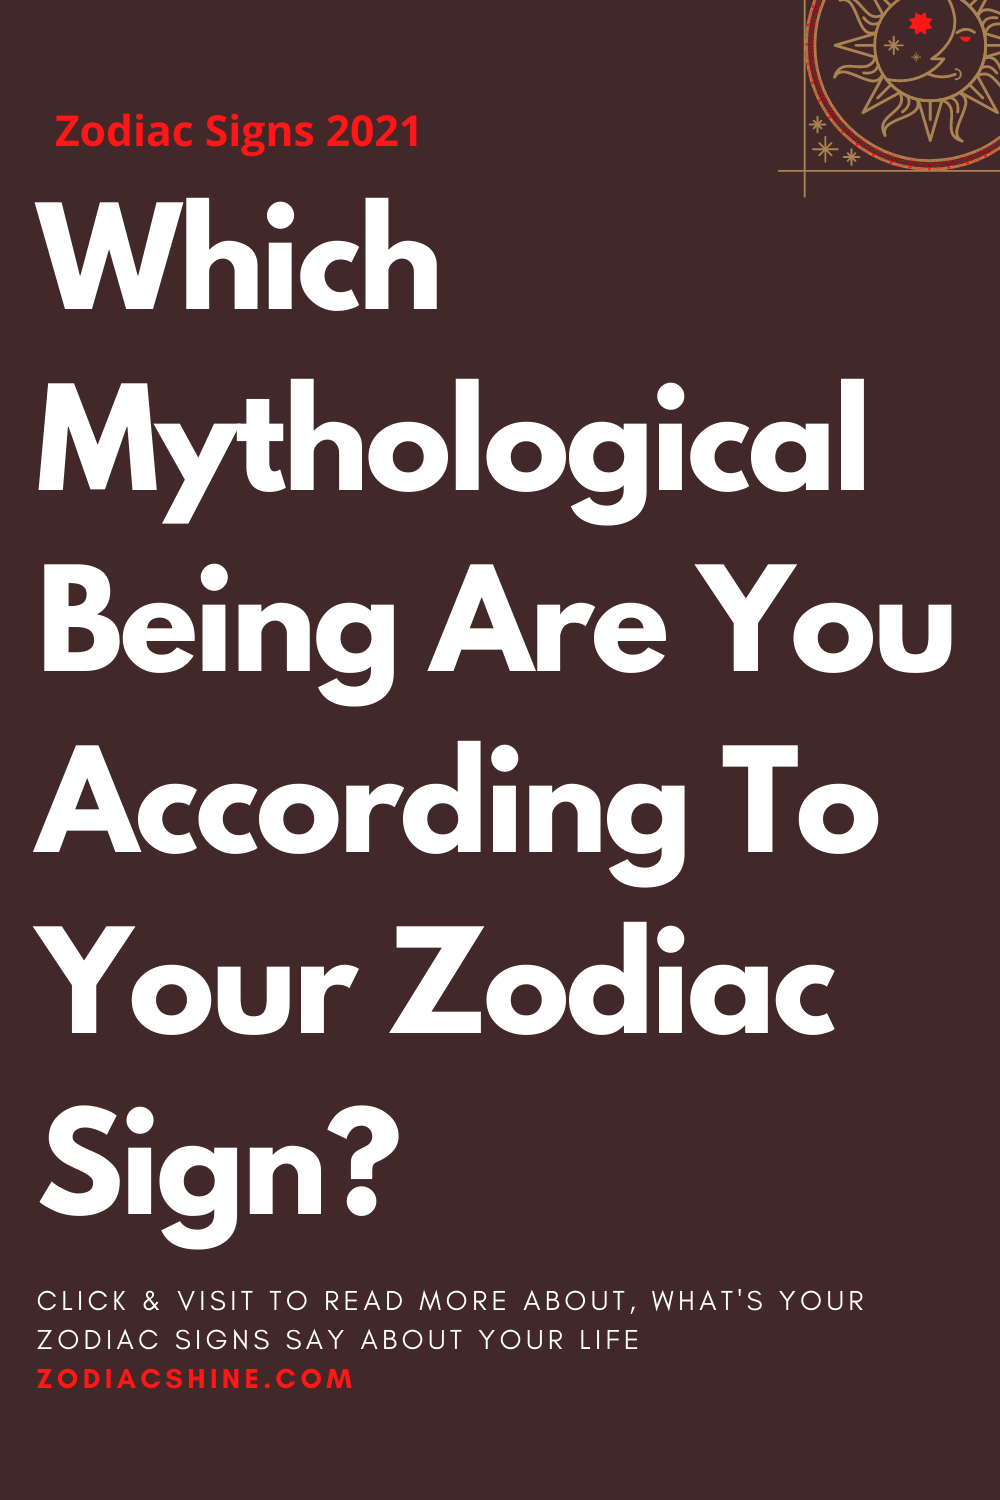 Which Mythological Being Are You According To Your Zodiac Sign?